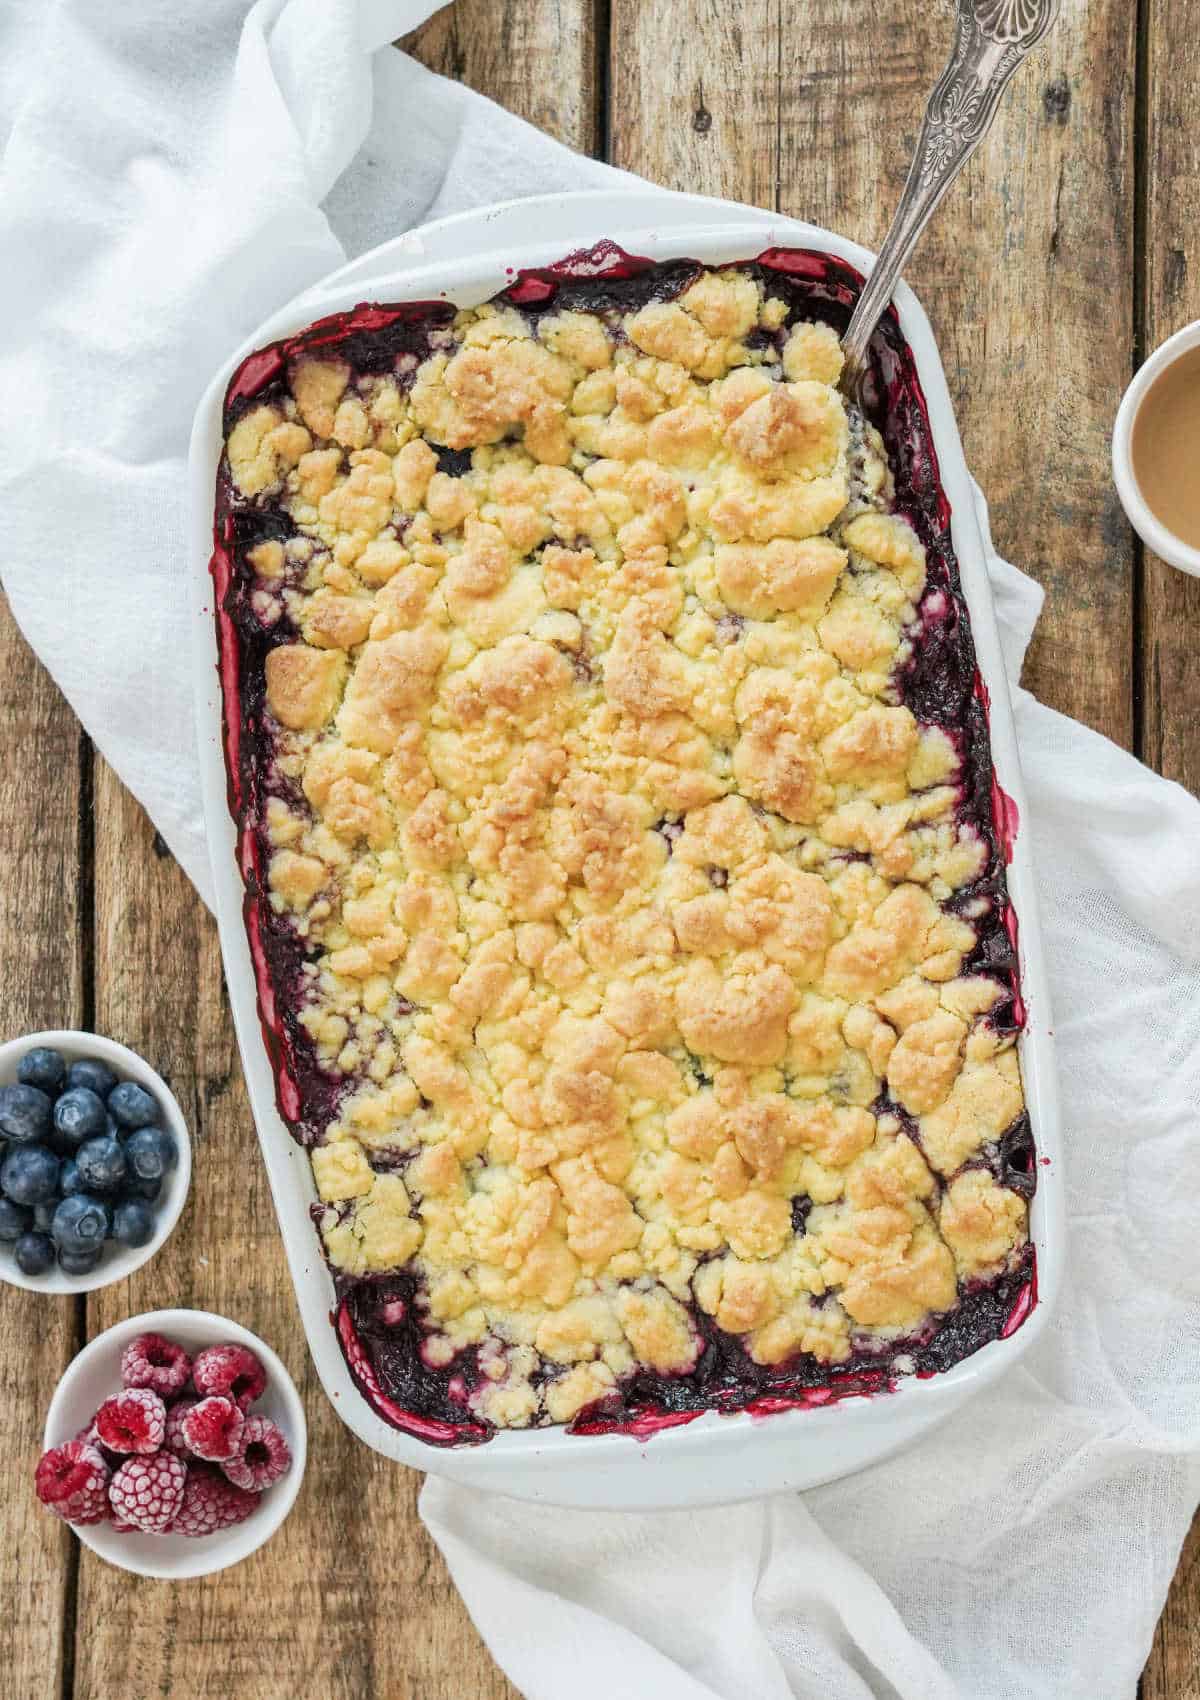 Top view of rectangular white baking dish with berry dump cake. White cloth, wooden table, bowls of berries.